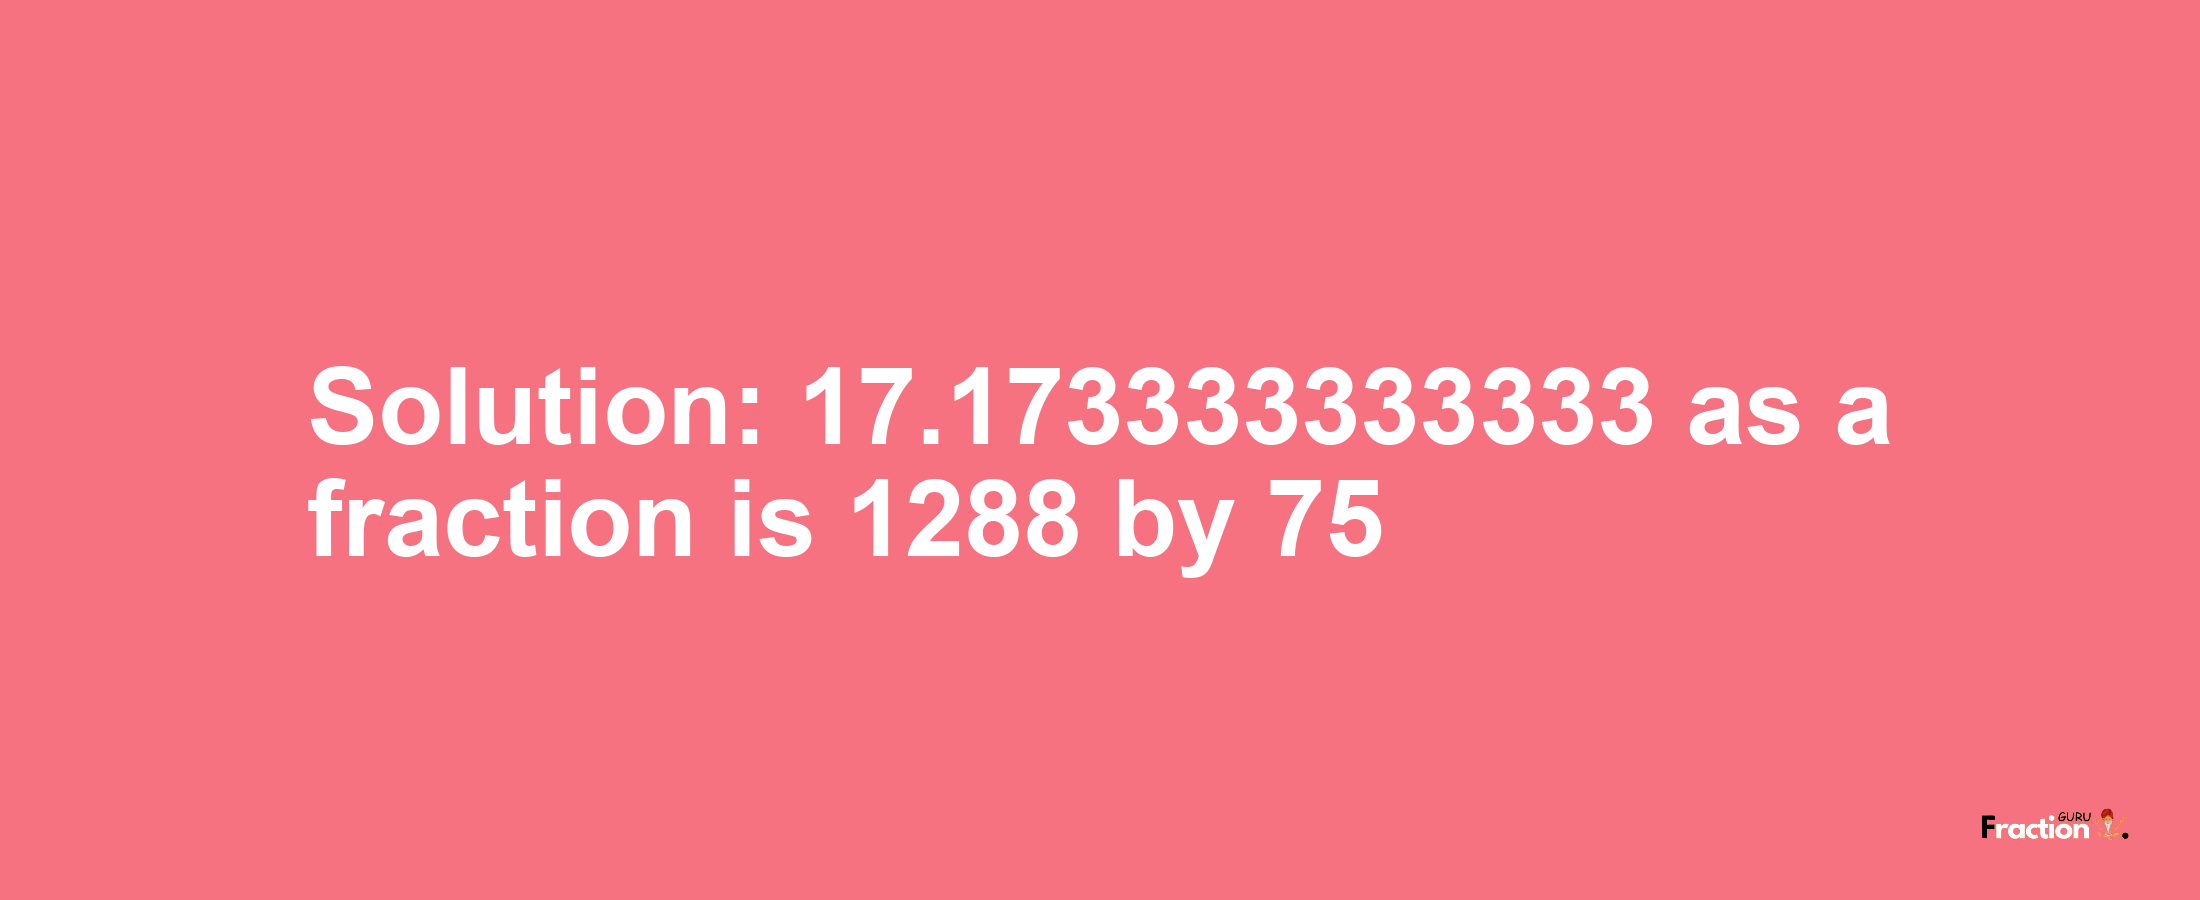 Solution:17.173333333333 as a fraction is 1288/75